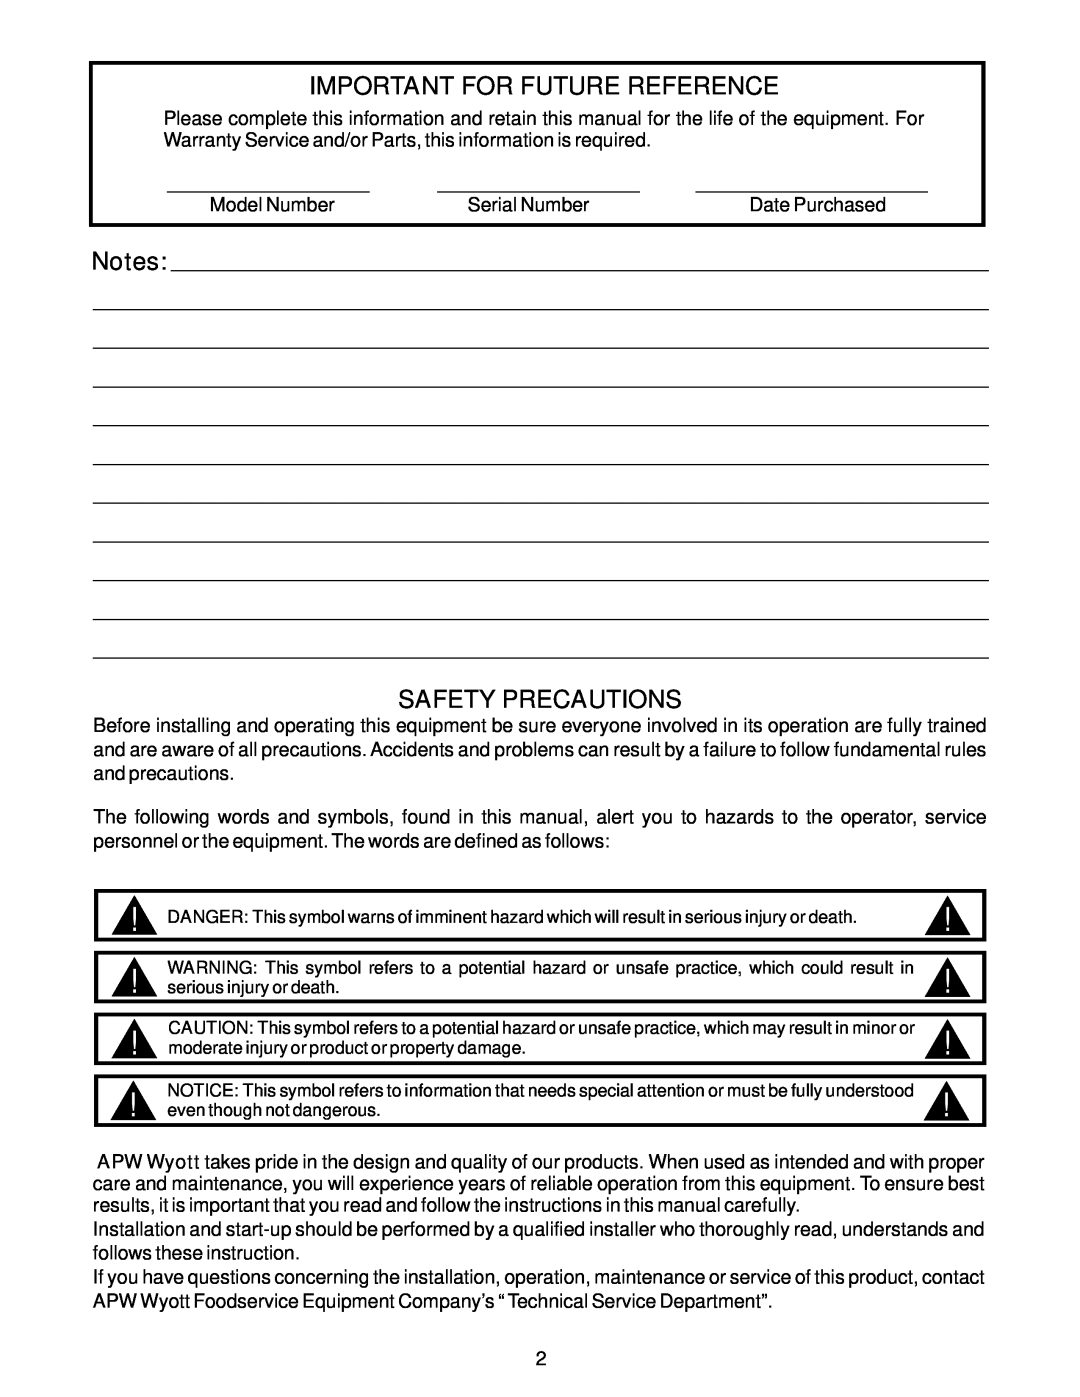 APW Wyott XTRM-2, XTRM-3 operating instructions Important For Future Reference, Notes SAFETY PRECAUTIONS 